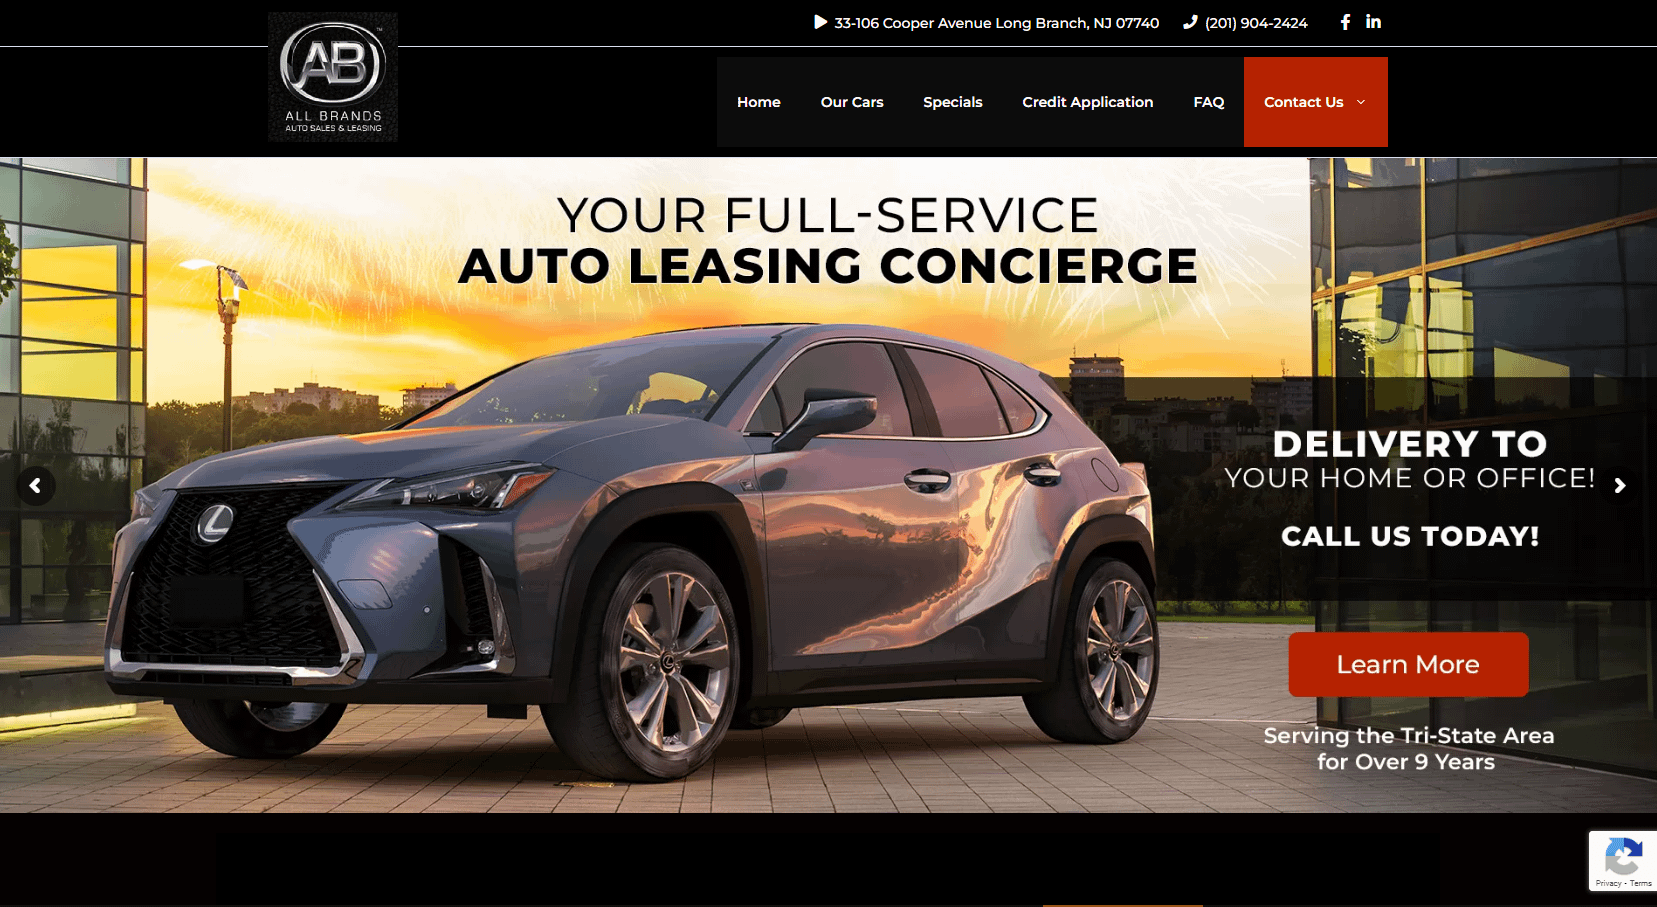 All Brands Auto Sales & Leasing